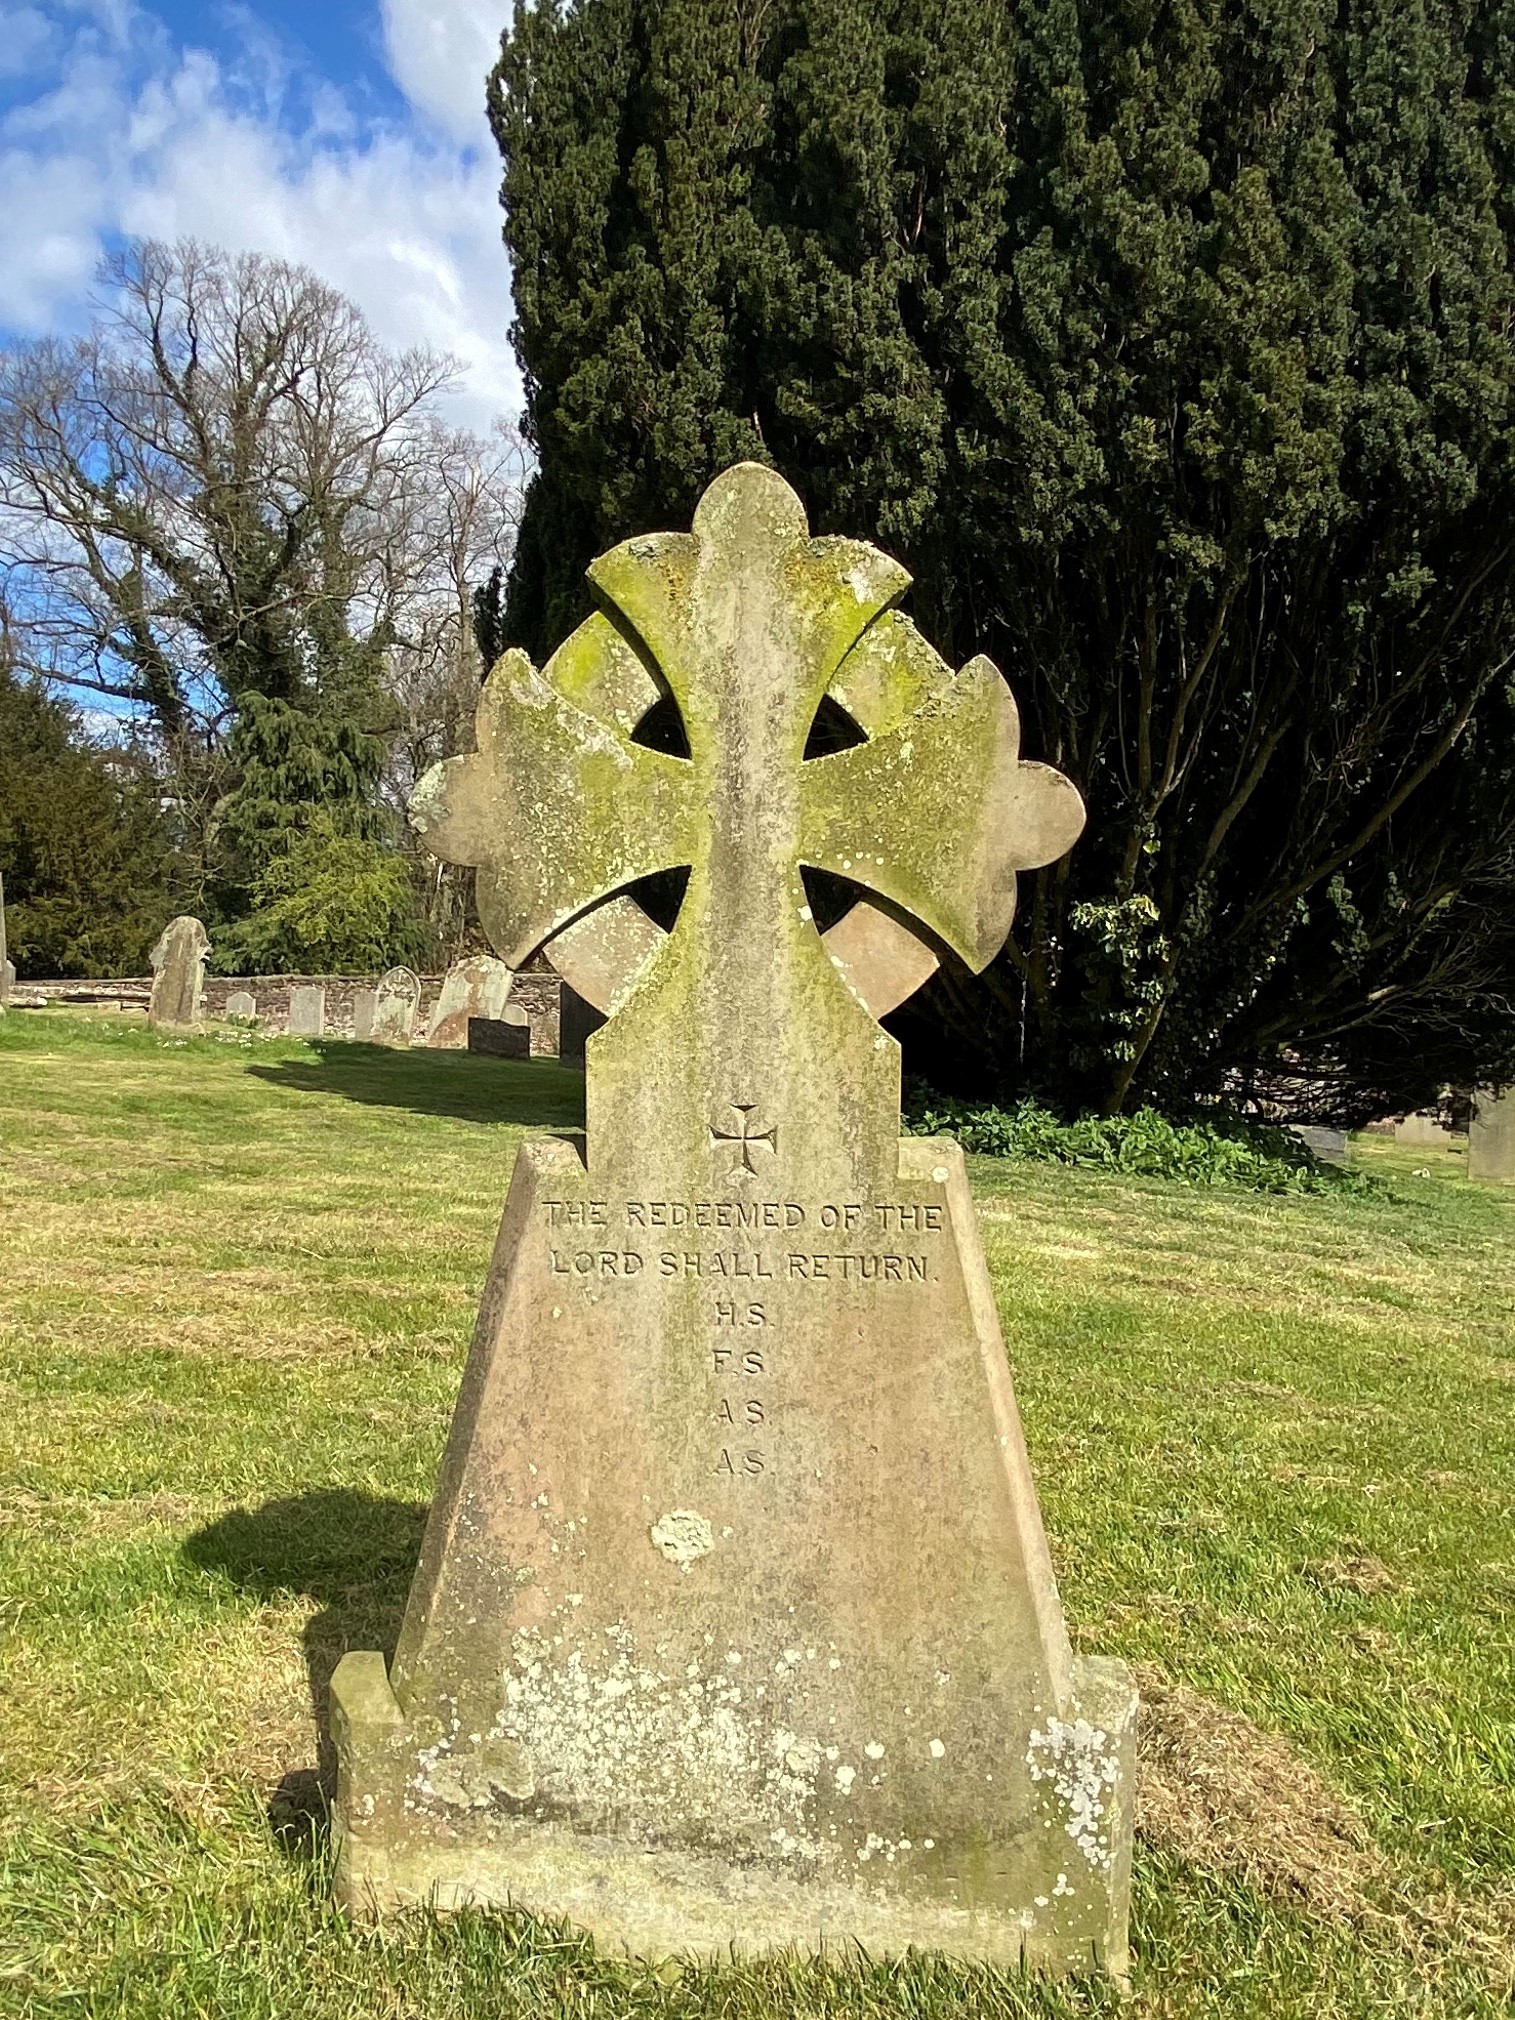 A grave marker in the church yard in Crayke with just initials and little other information